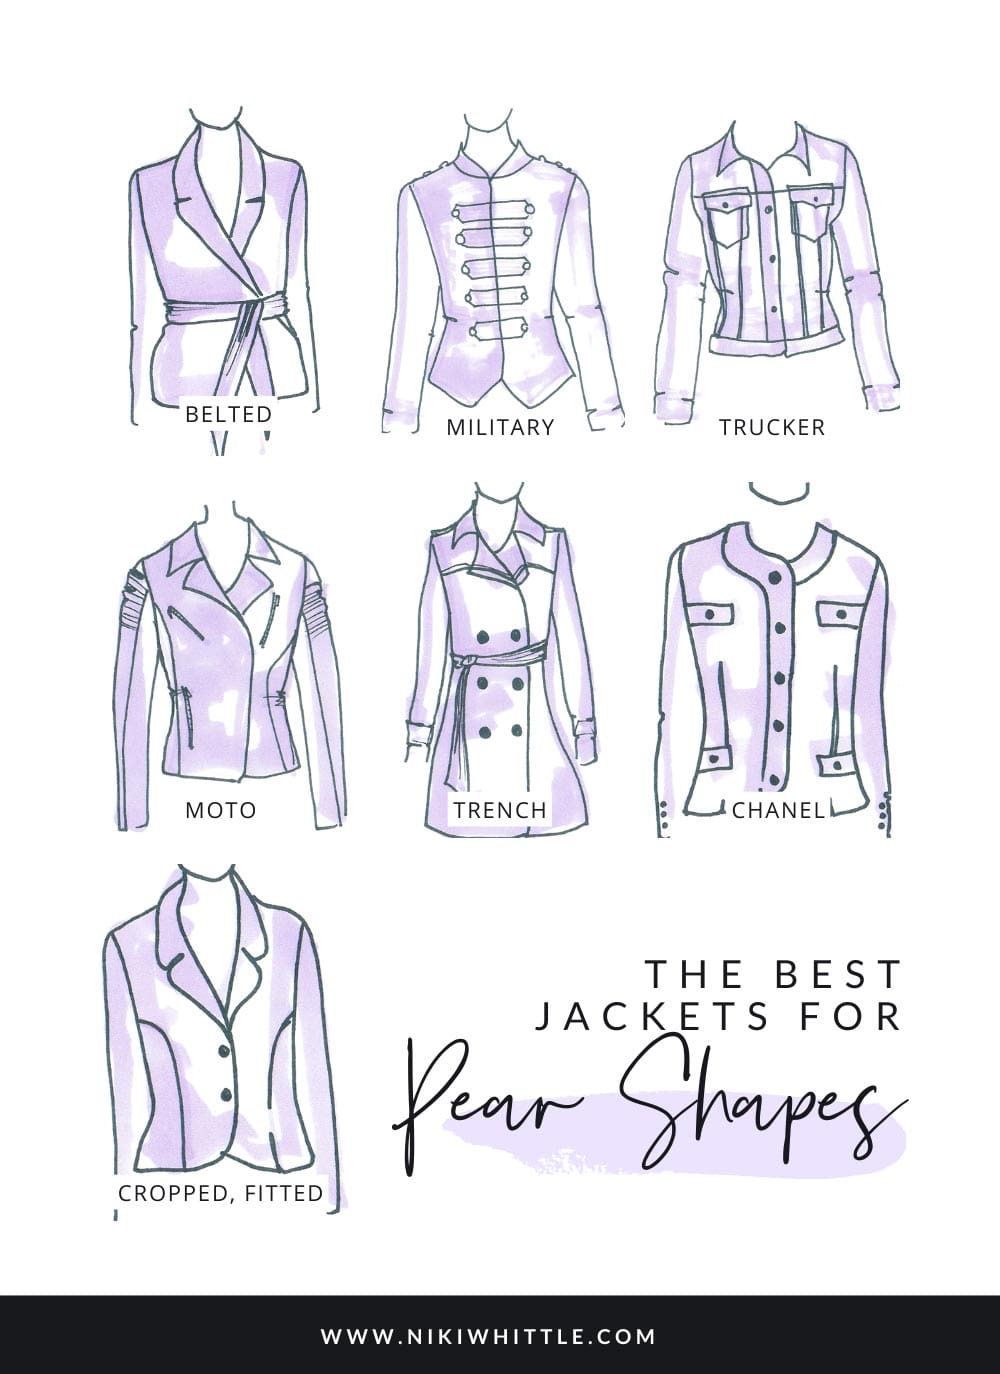 Images of jackets and coats that flatter a pear shape